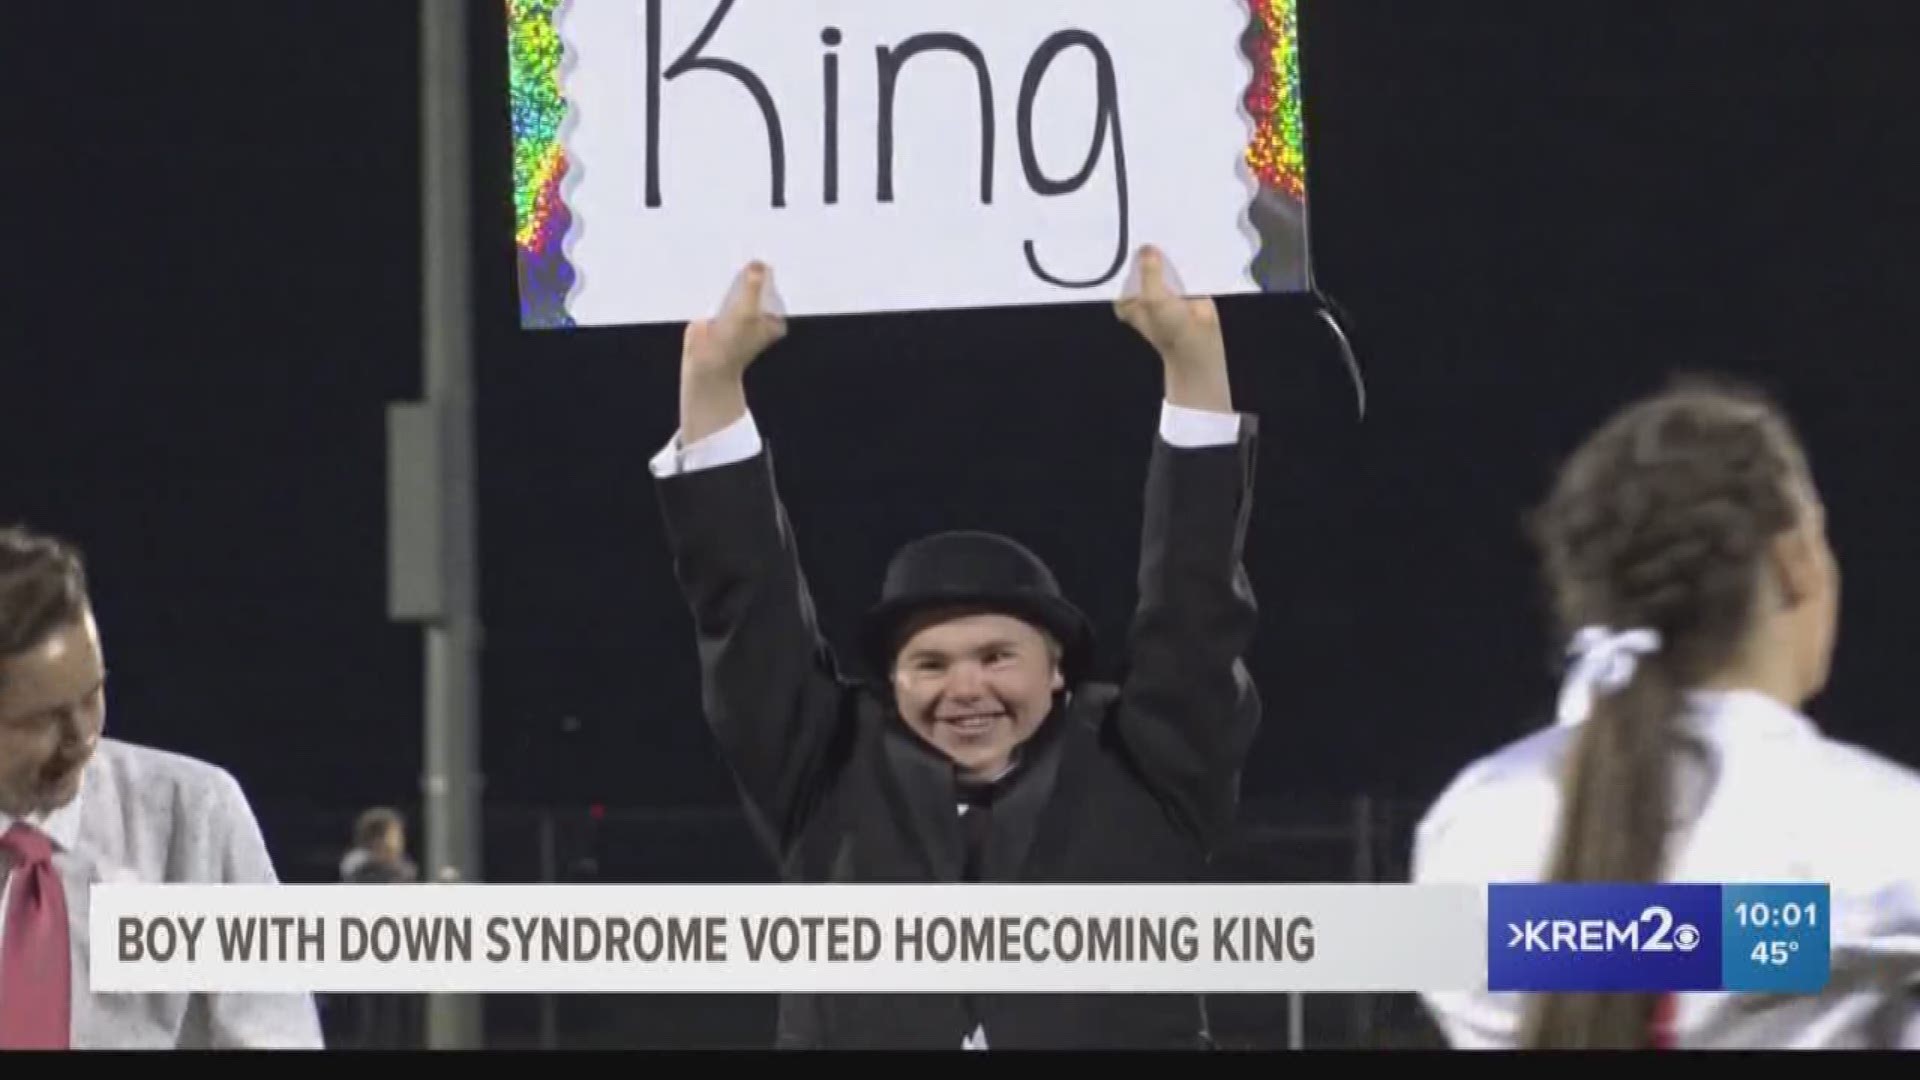 Boy with down syndrome elected homecoming king